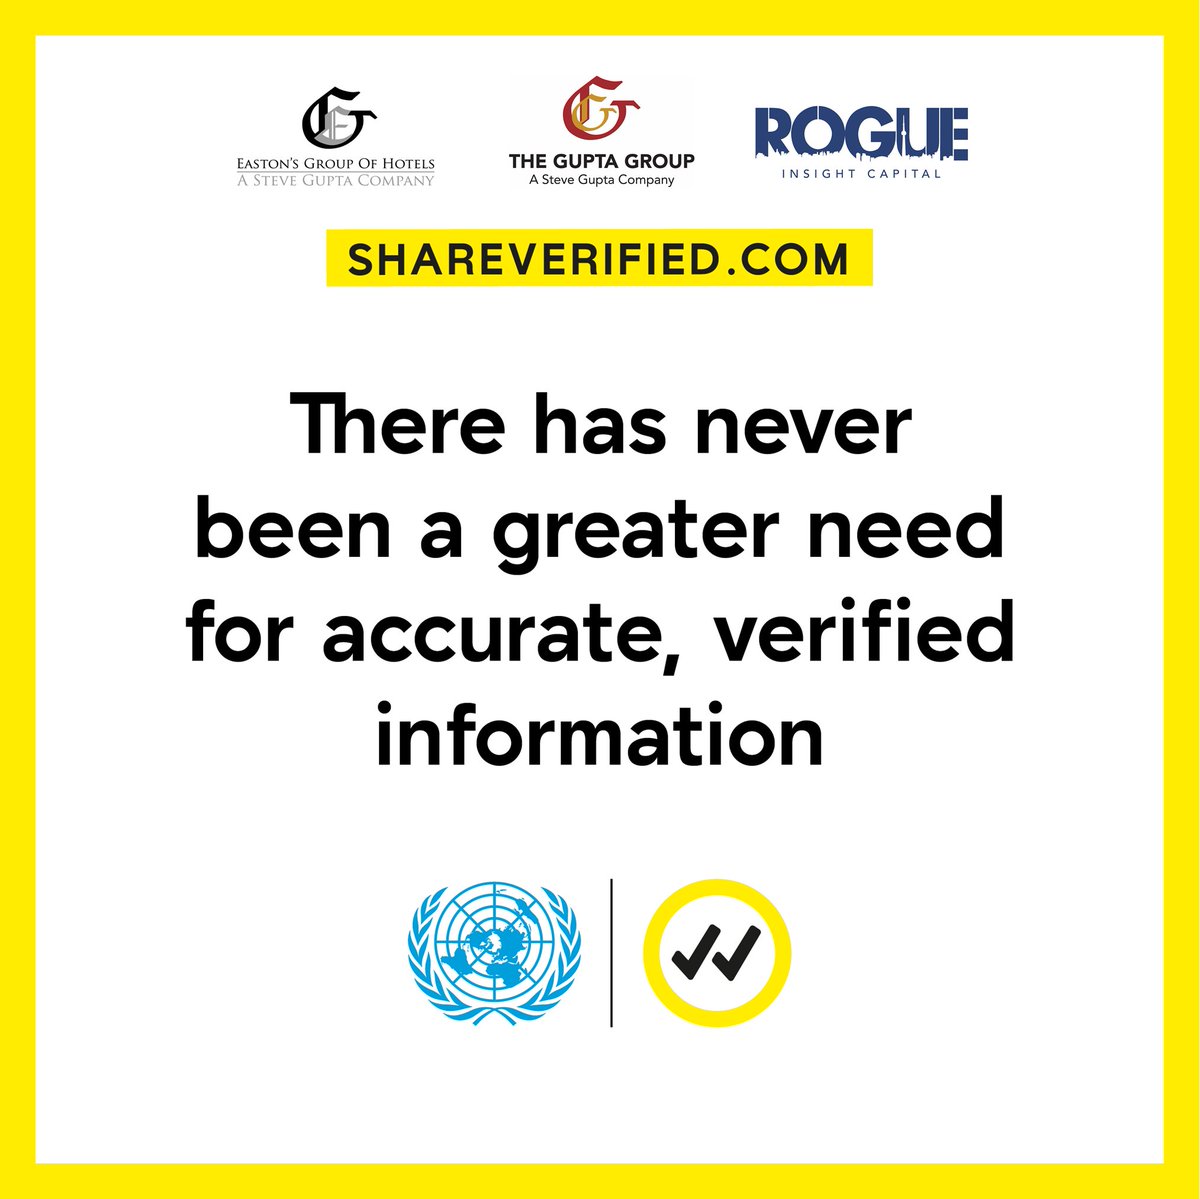 I am so proud to be working with the @unitednations and @theNEXUSsummit to ensure that everyone has access to verified information regarding #covid19. Please share with love so we can all come out of this together and stronger! @EastonsGroup @theguptagroup @rogueinsightcapital